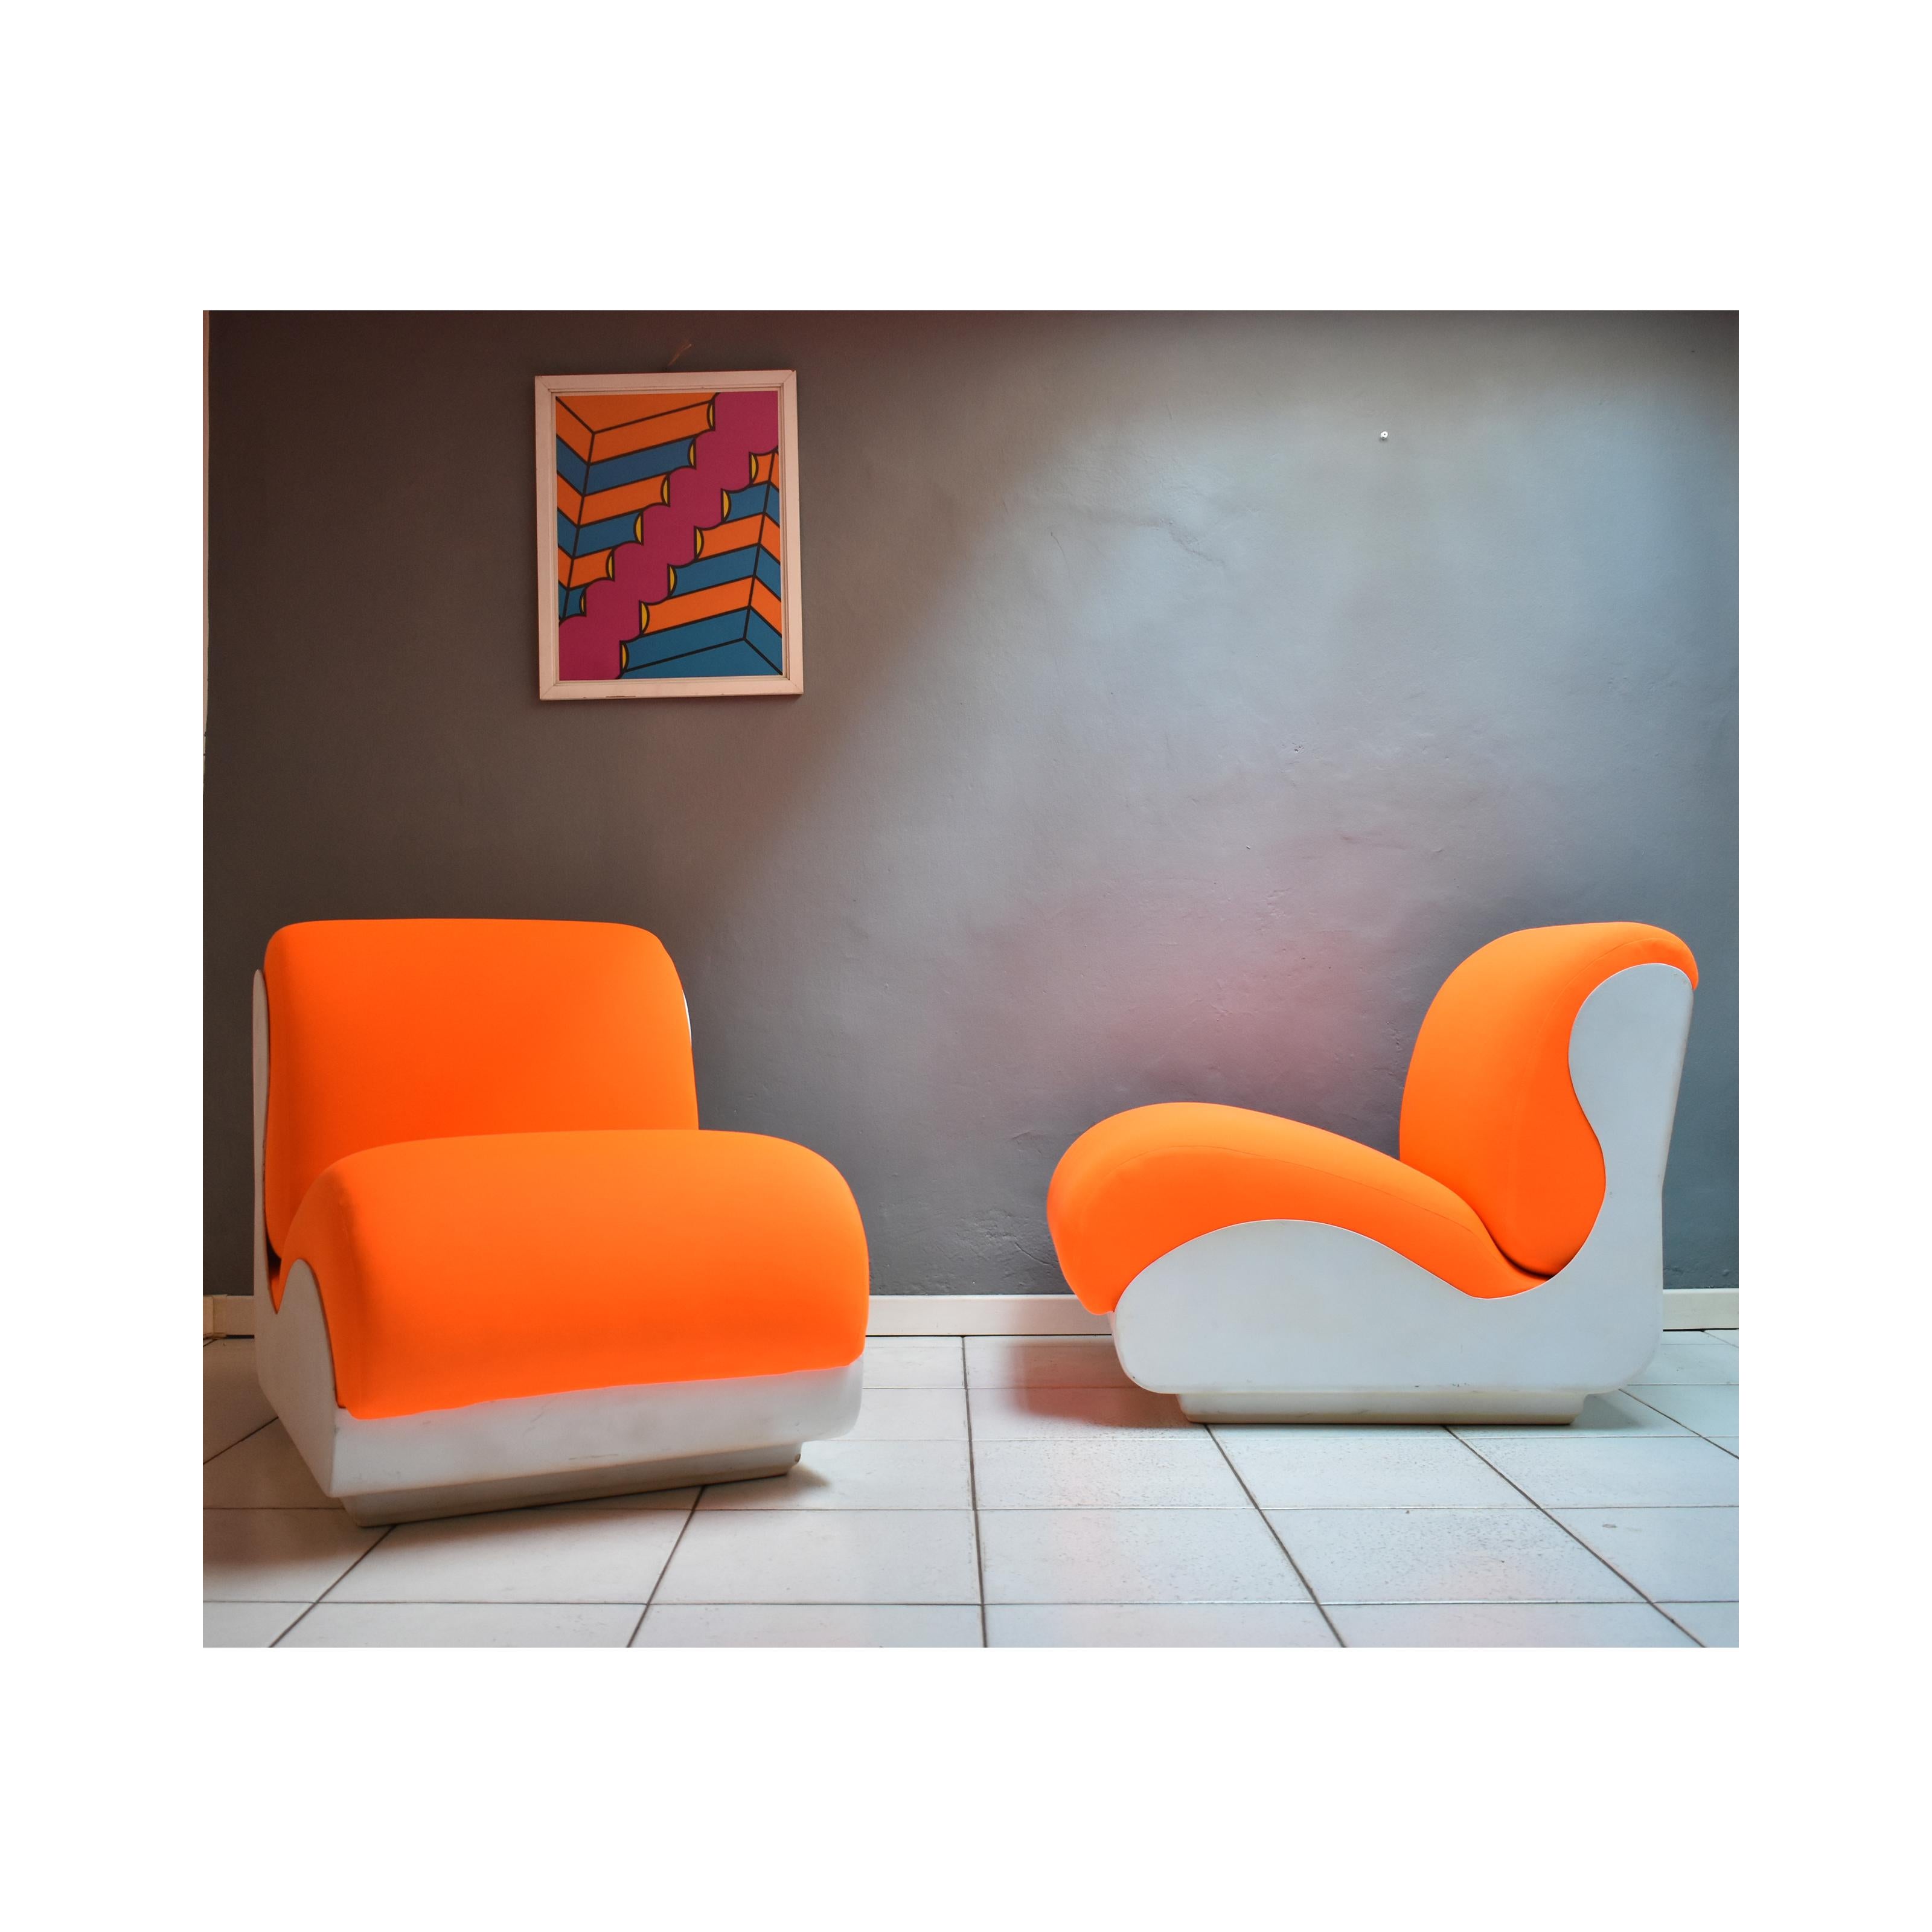 Set of two seventies armchairs, Italian manufacture.
The armchairs have a white  fiberglass with a bright orange fabric seat.
They have a particular, almost futuristic structure.
The seat is completely removed from the structure, as shown in the